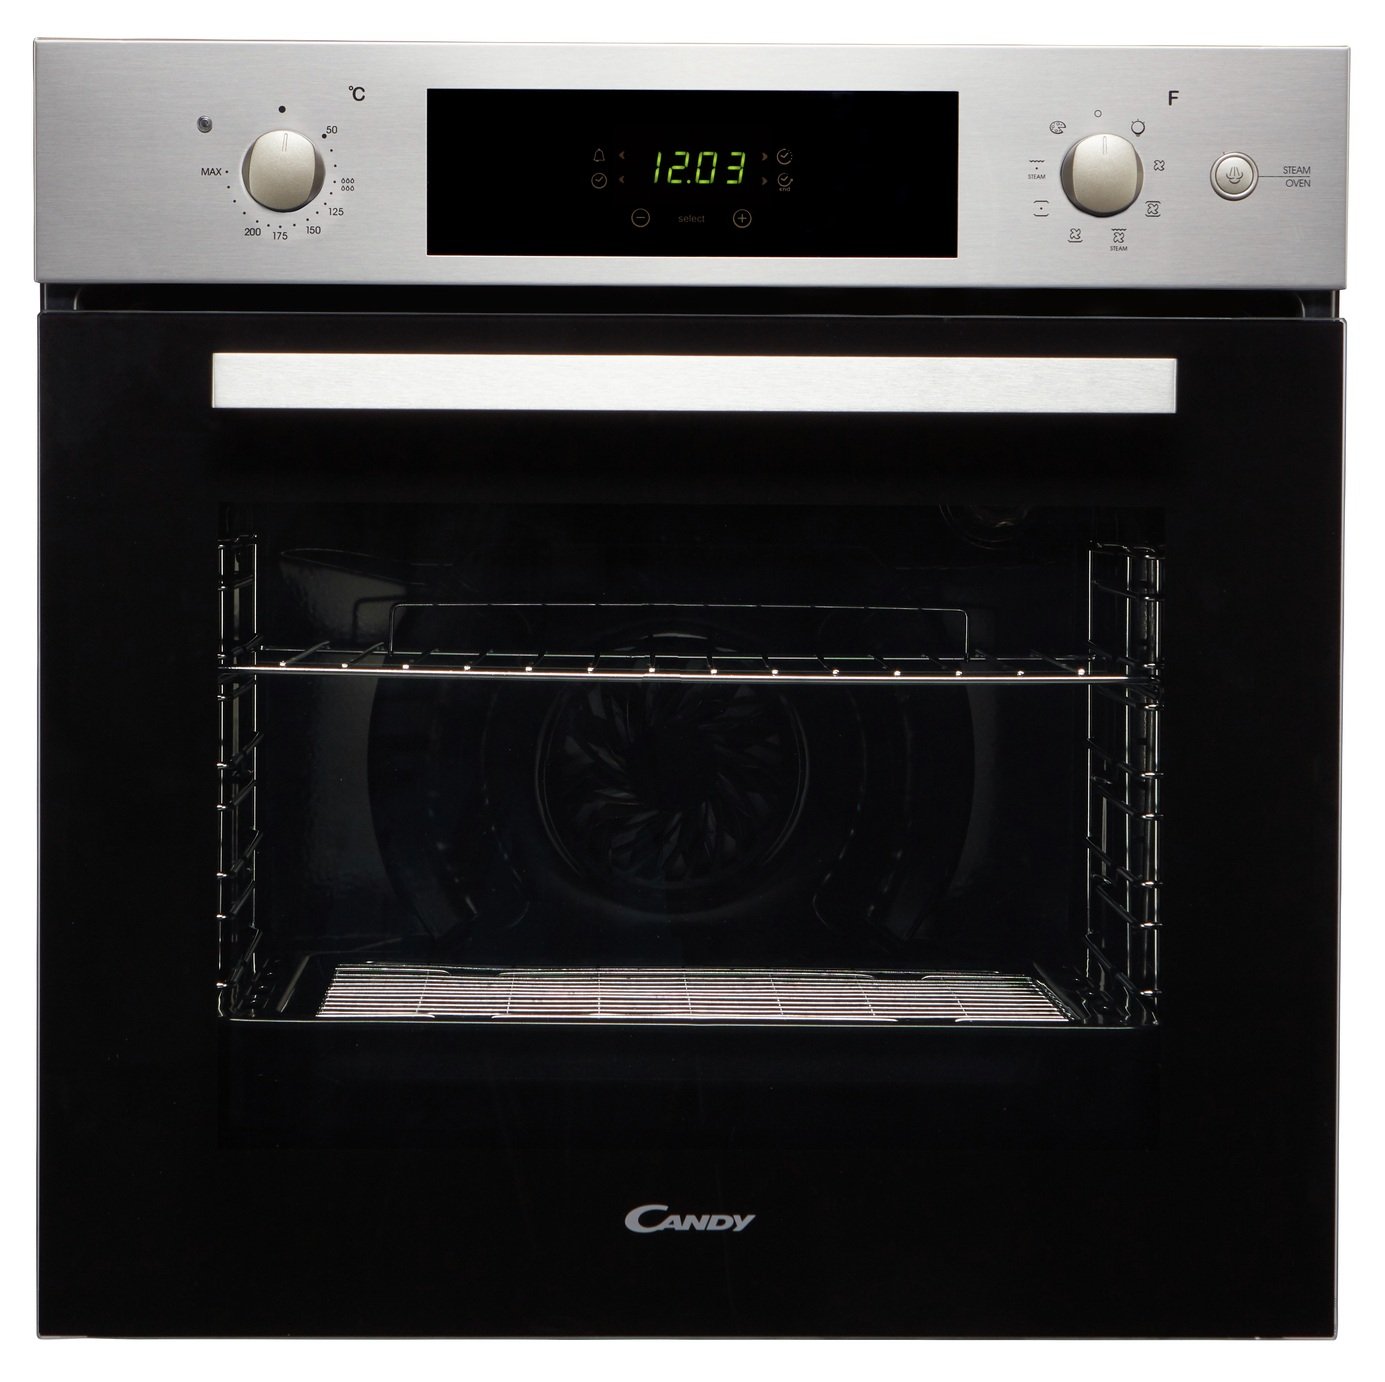 Candy FCP651SX/E Single Steam Oven - Stainless Steel